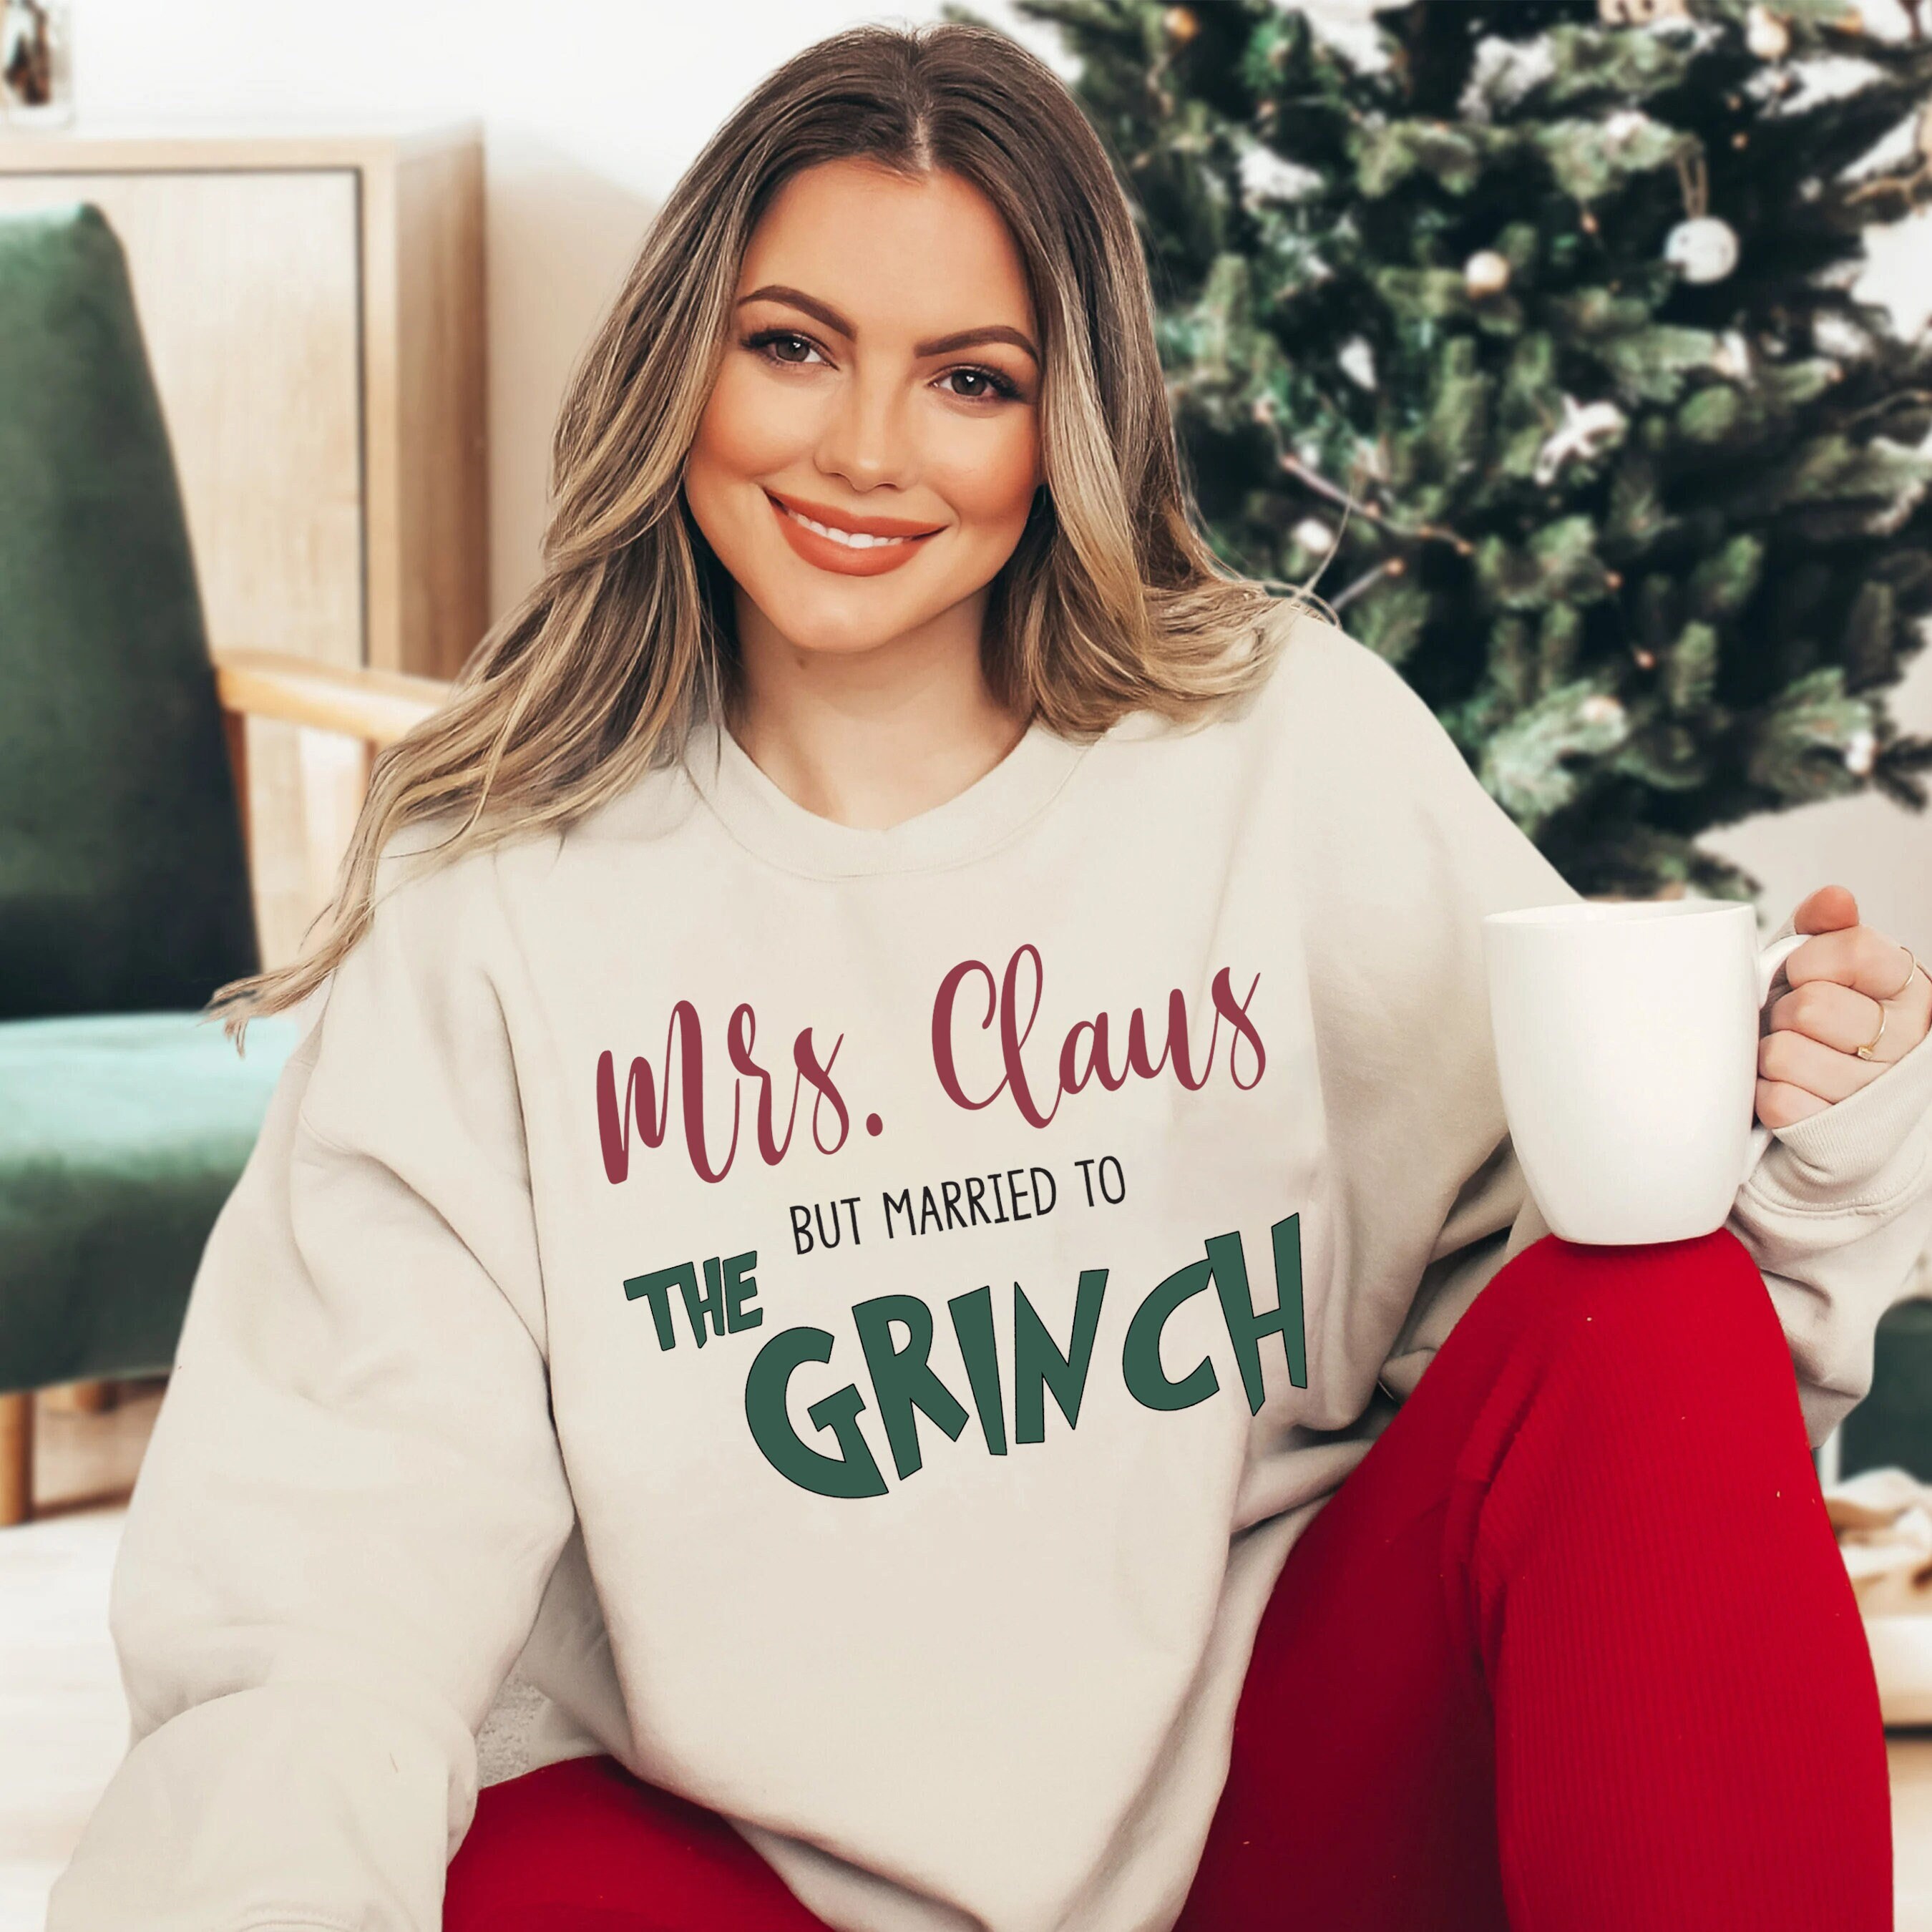 Discover Mrs. Claus But Married To The funny character Christmas Crewneck Sweatshirt, Whoville, funny character Christmas Sweatshirt, Funny Couples Christmas Clothing